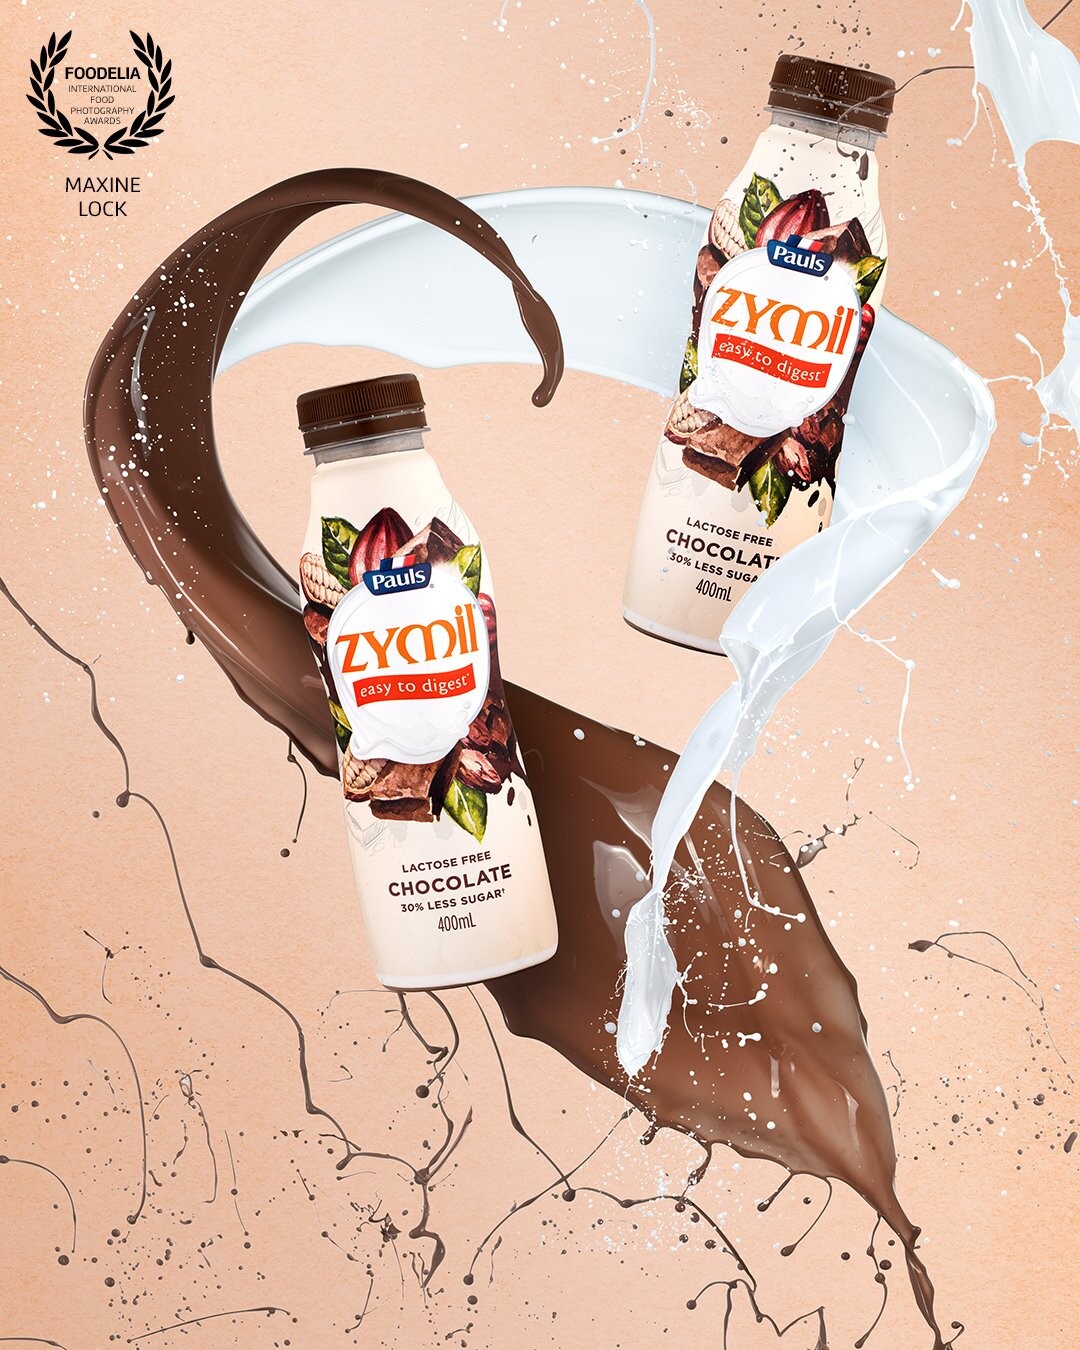 Chocolate milk bottles surrounded by splashes of chocolate and splashes of milk, with the splashes surrounding the bottles and creating a bit of a "mess" effect on the sides of the image.